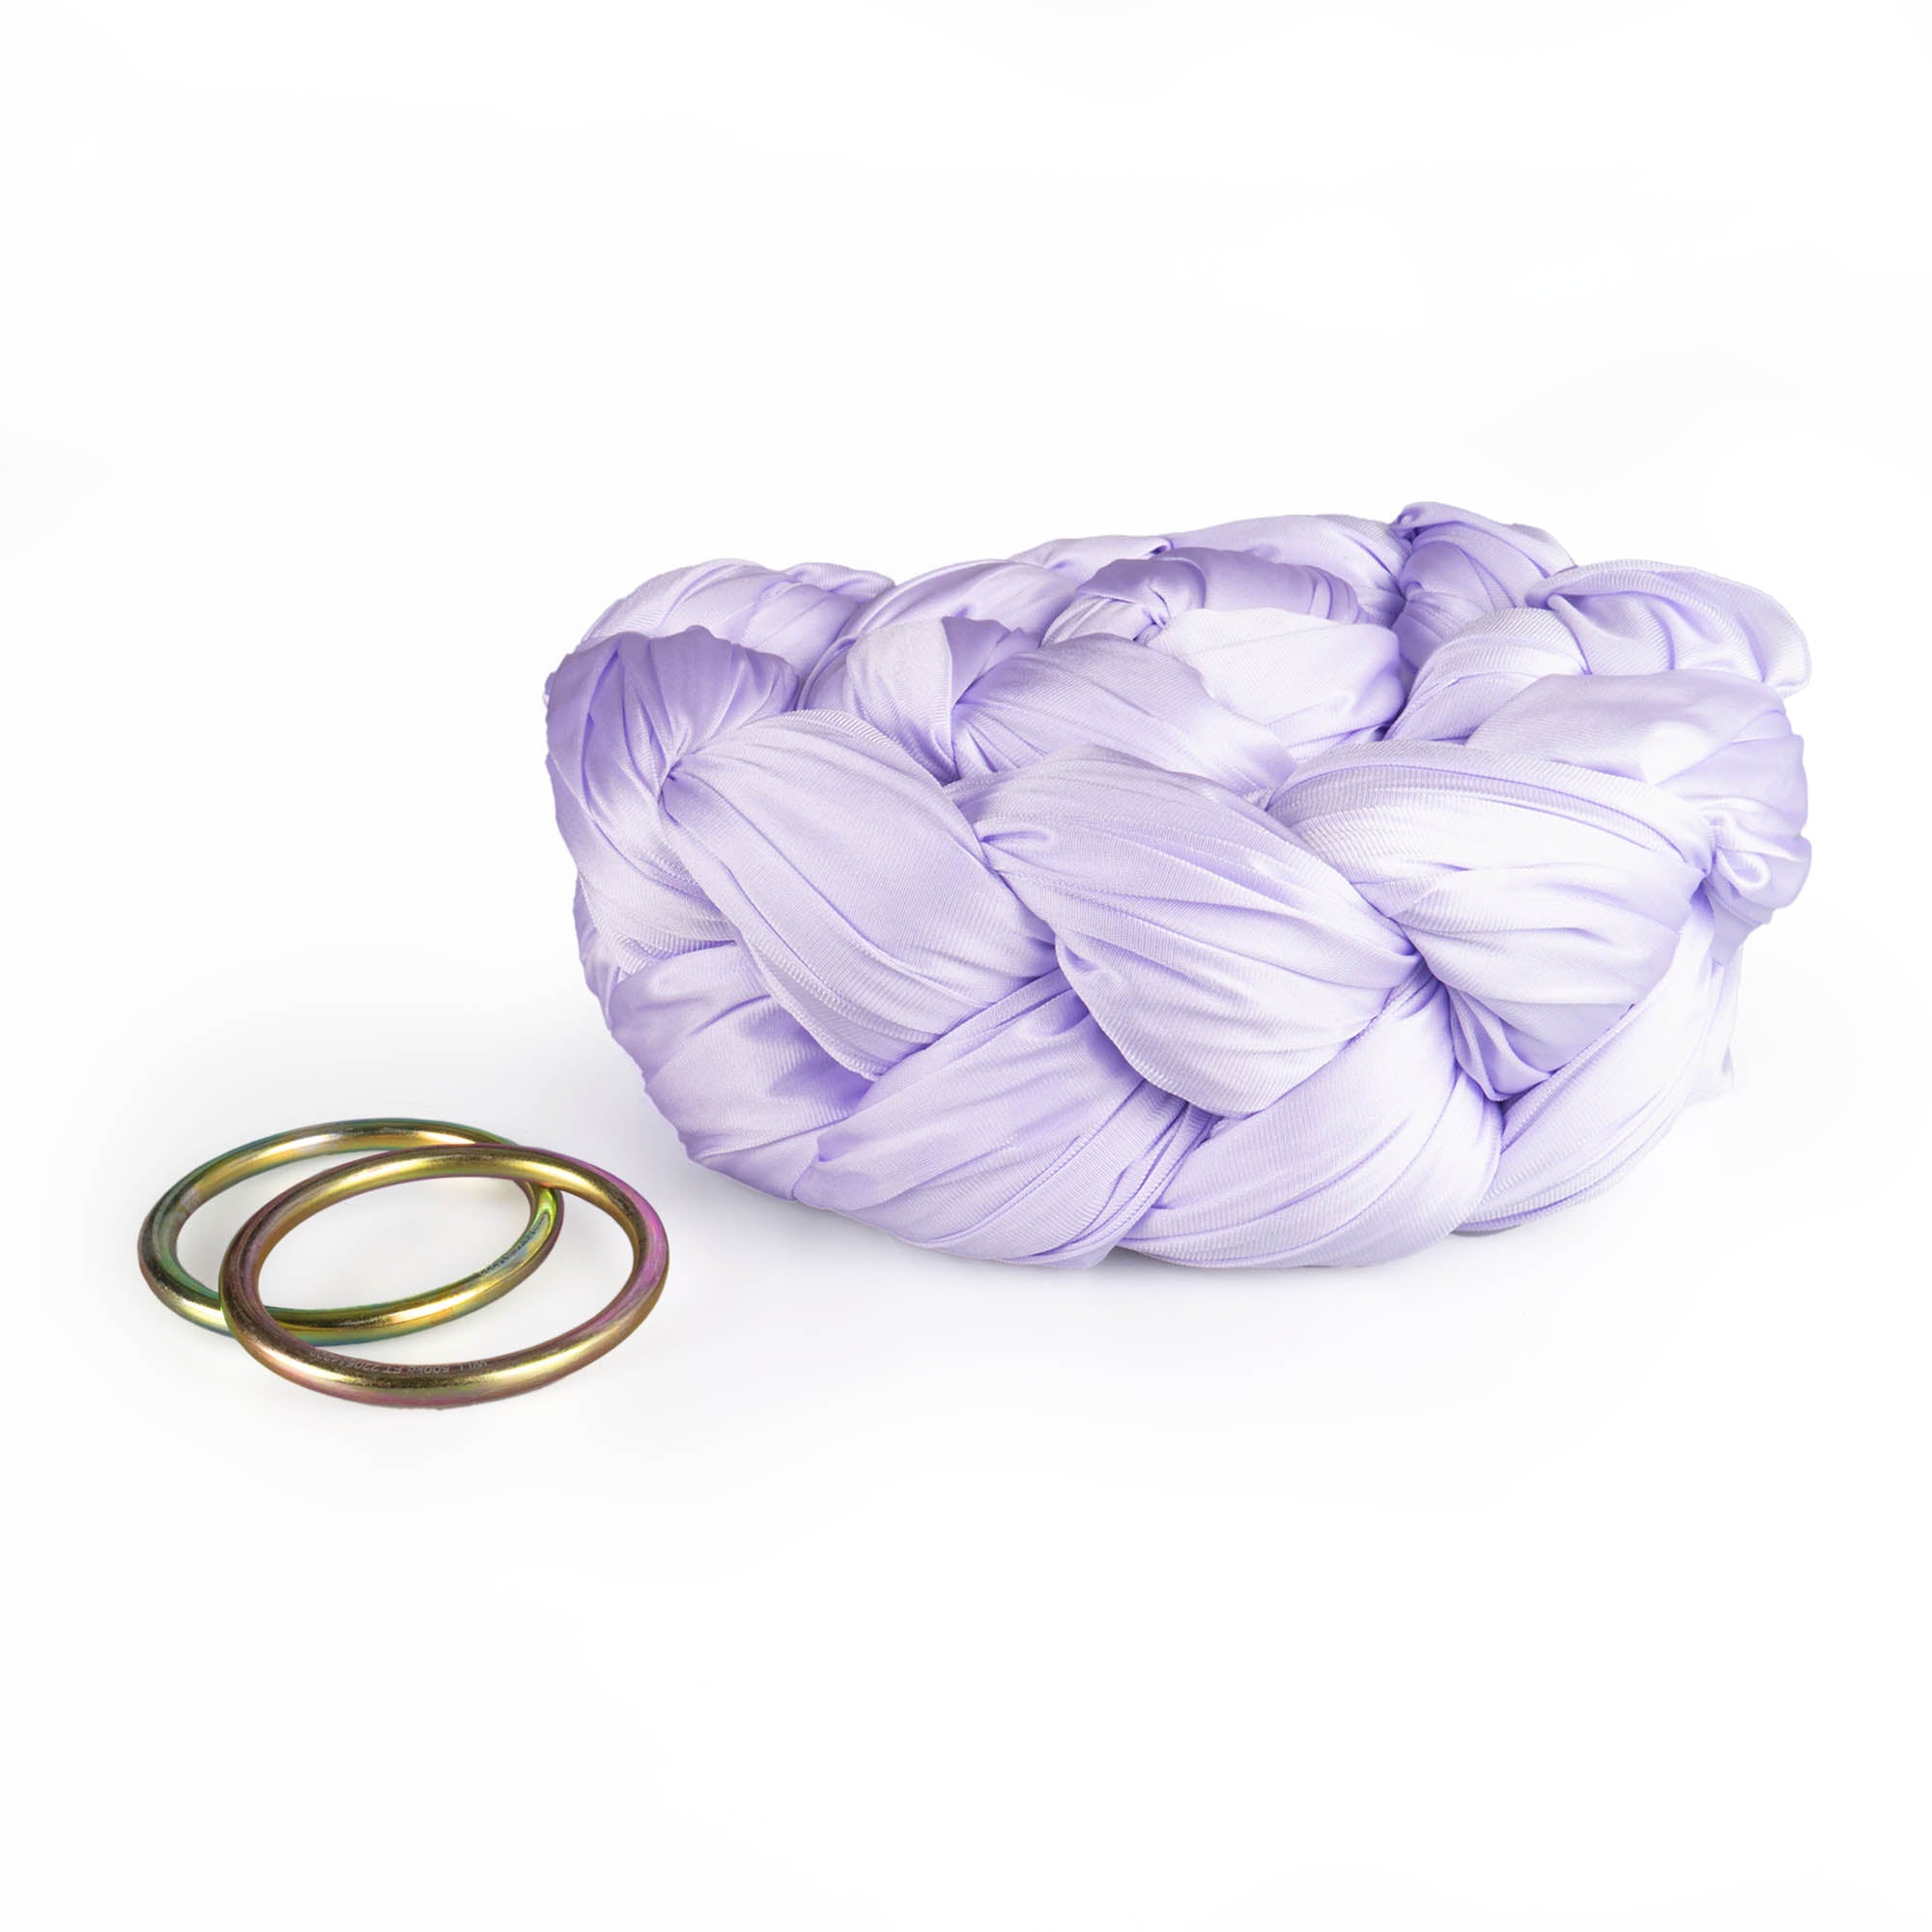 Prodigy lilac Aerial sling with O rings and bag daisy chained